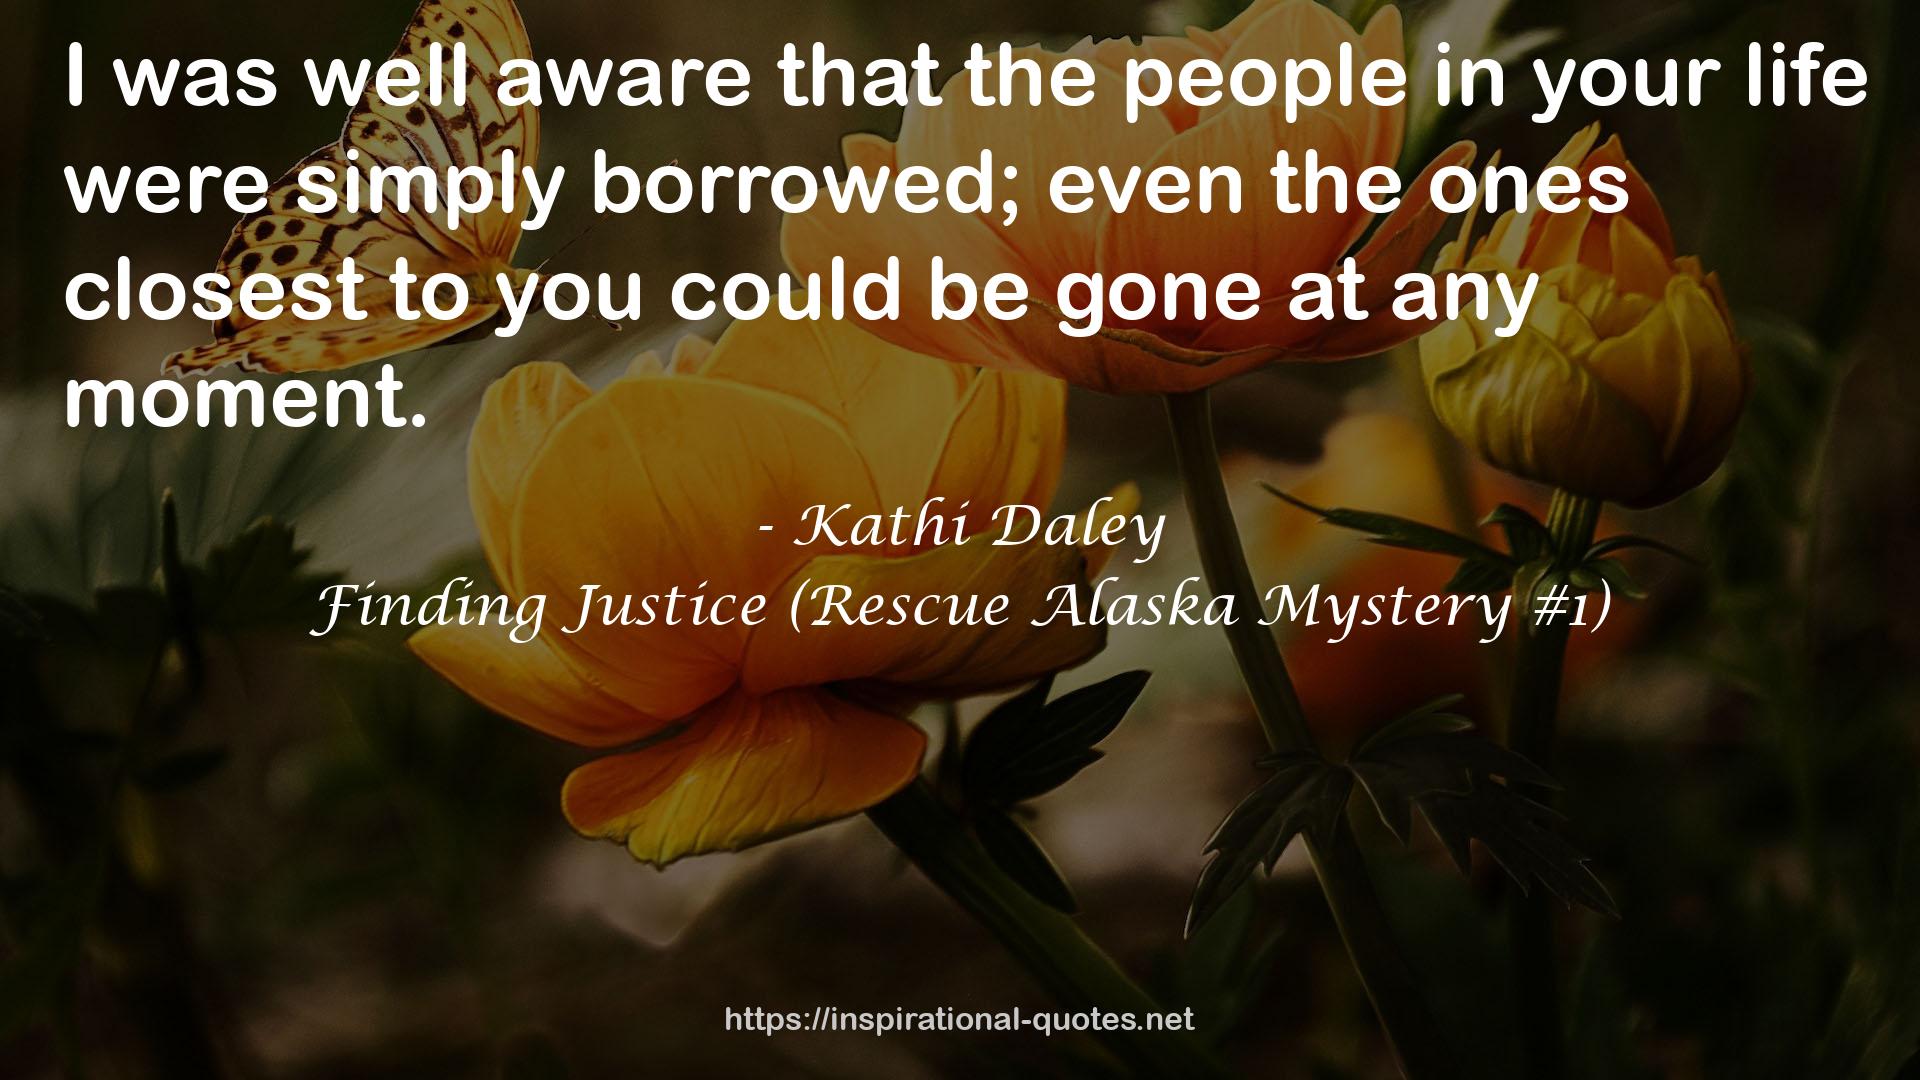 Finding Justice (Rescue Alaska Mystery #1) QUOTES